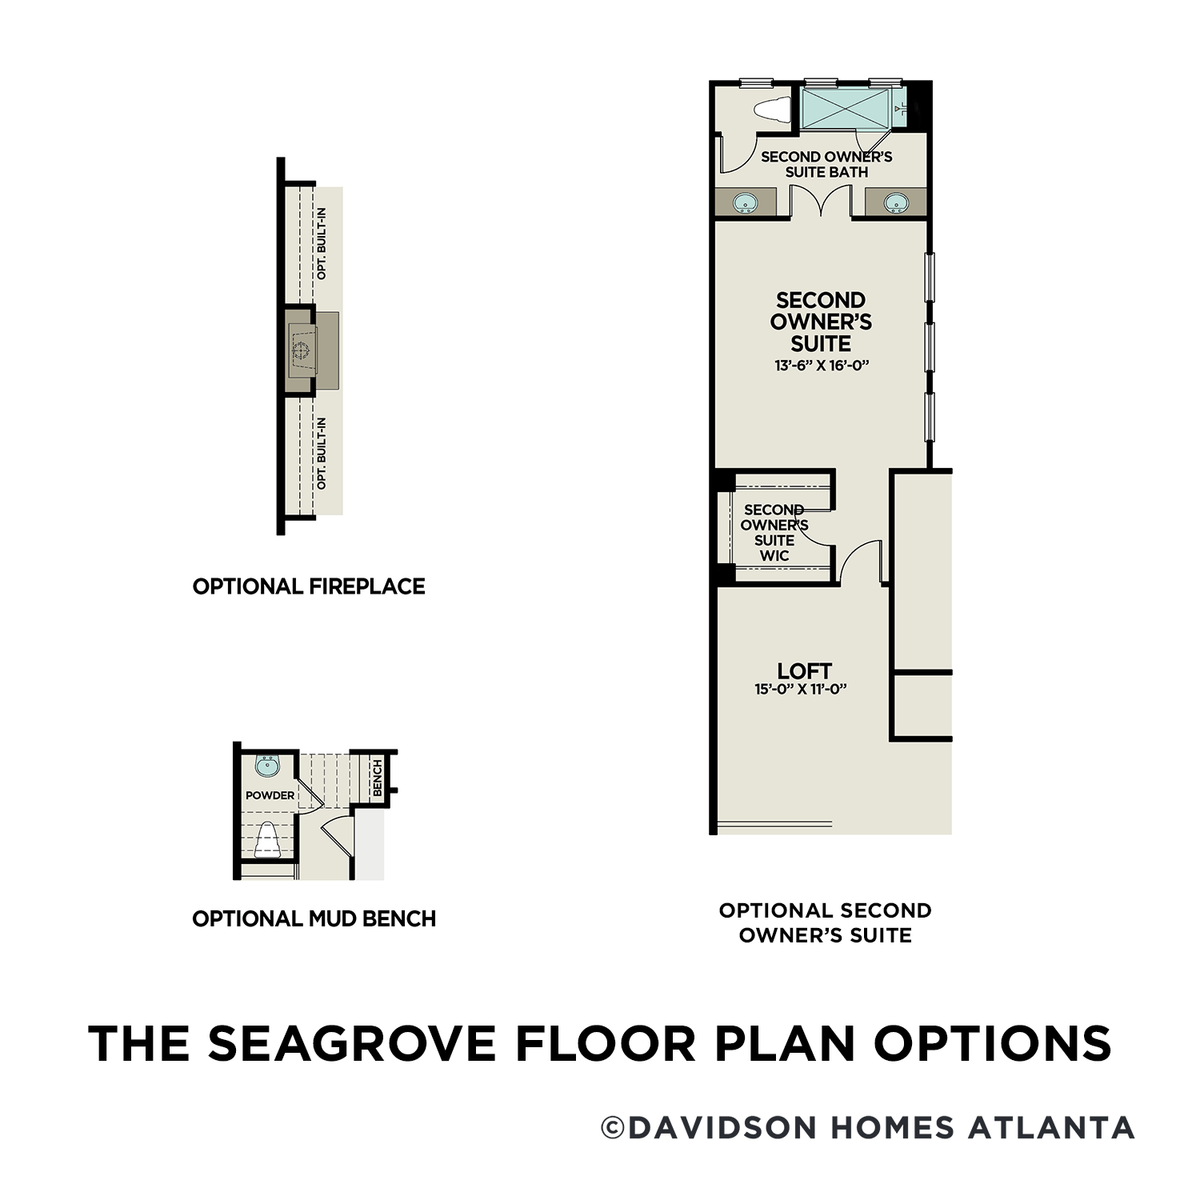 3 - The Seagrove A floor plan layout for 406 Falling Water Avenue in Davidson Homes' The Village at Towne Lake community.